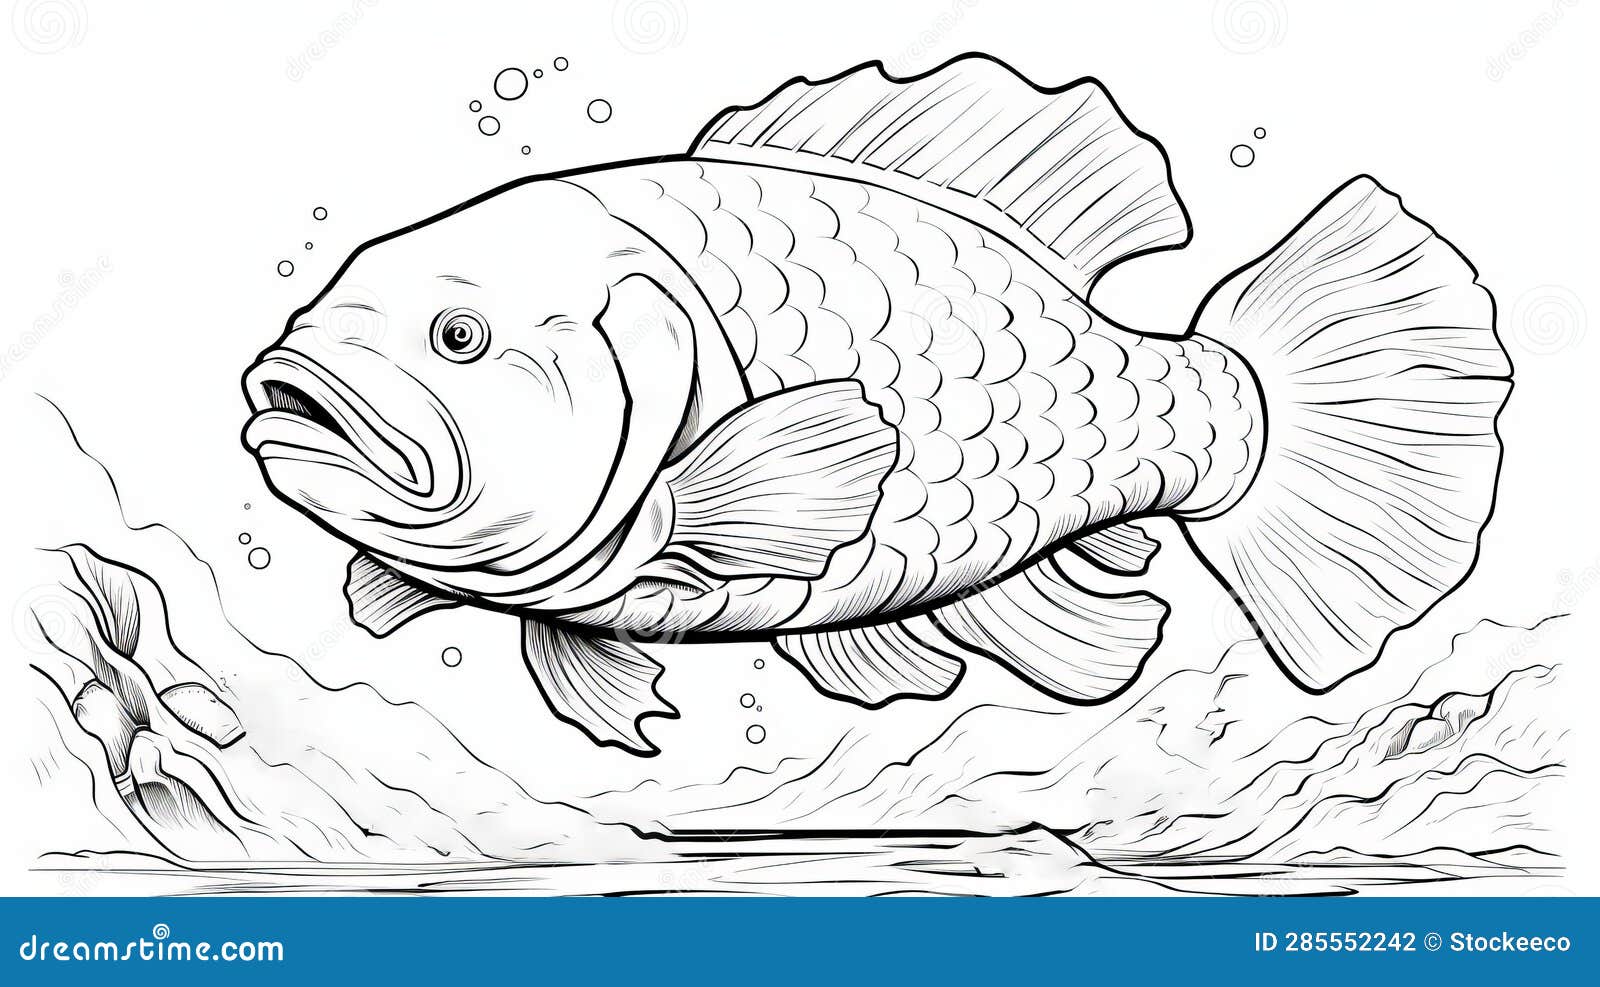 walrus coloring book page with goldfish